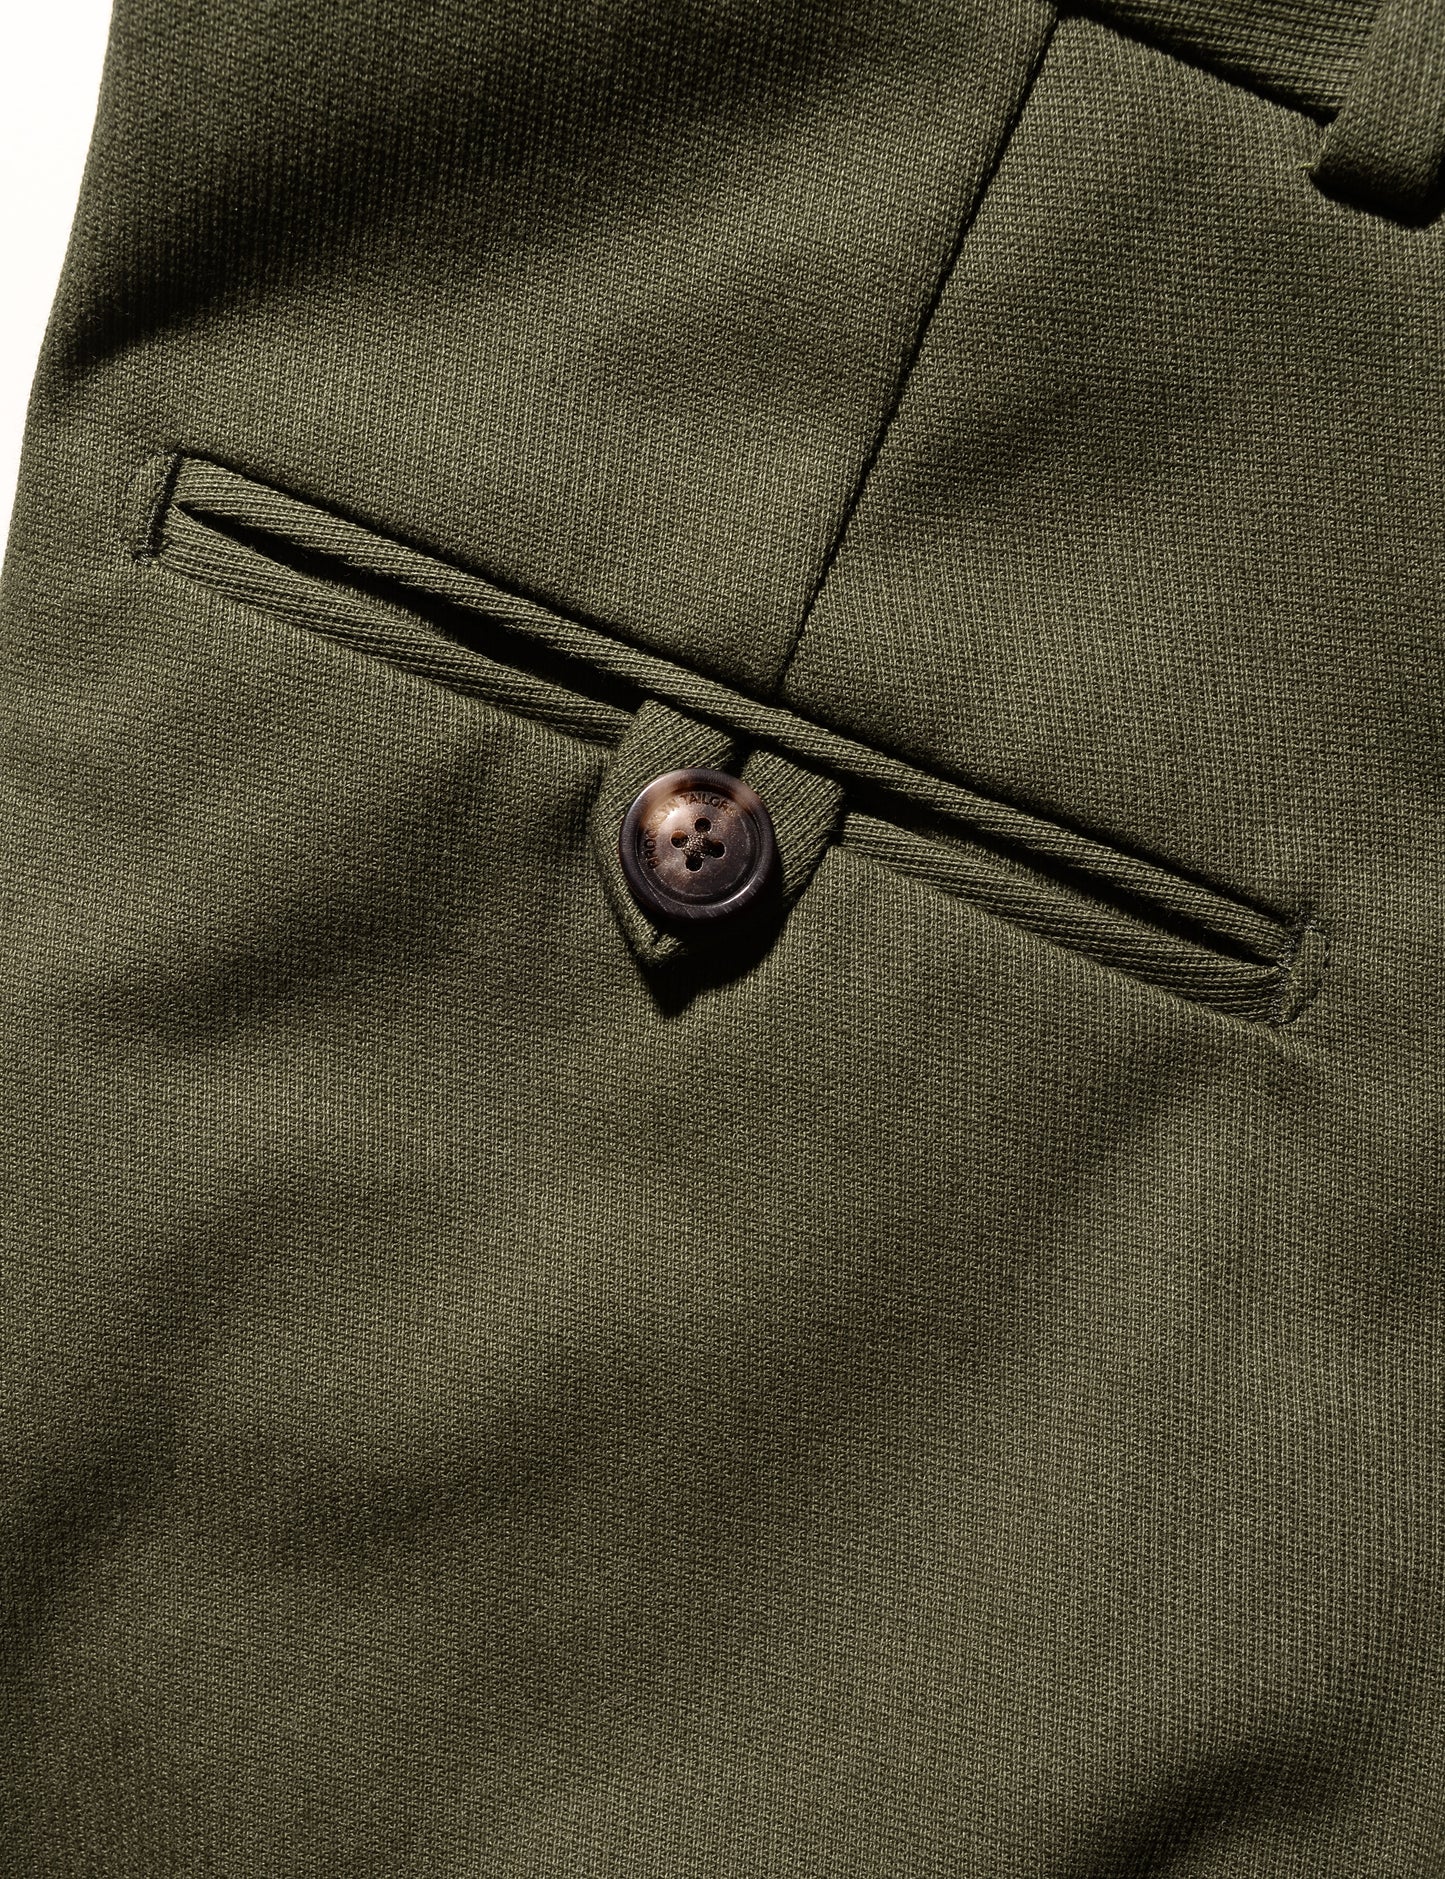 BKT50 Tailored Trousers in Cavalry Twill - Olive